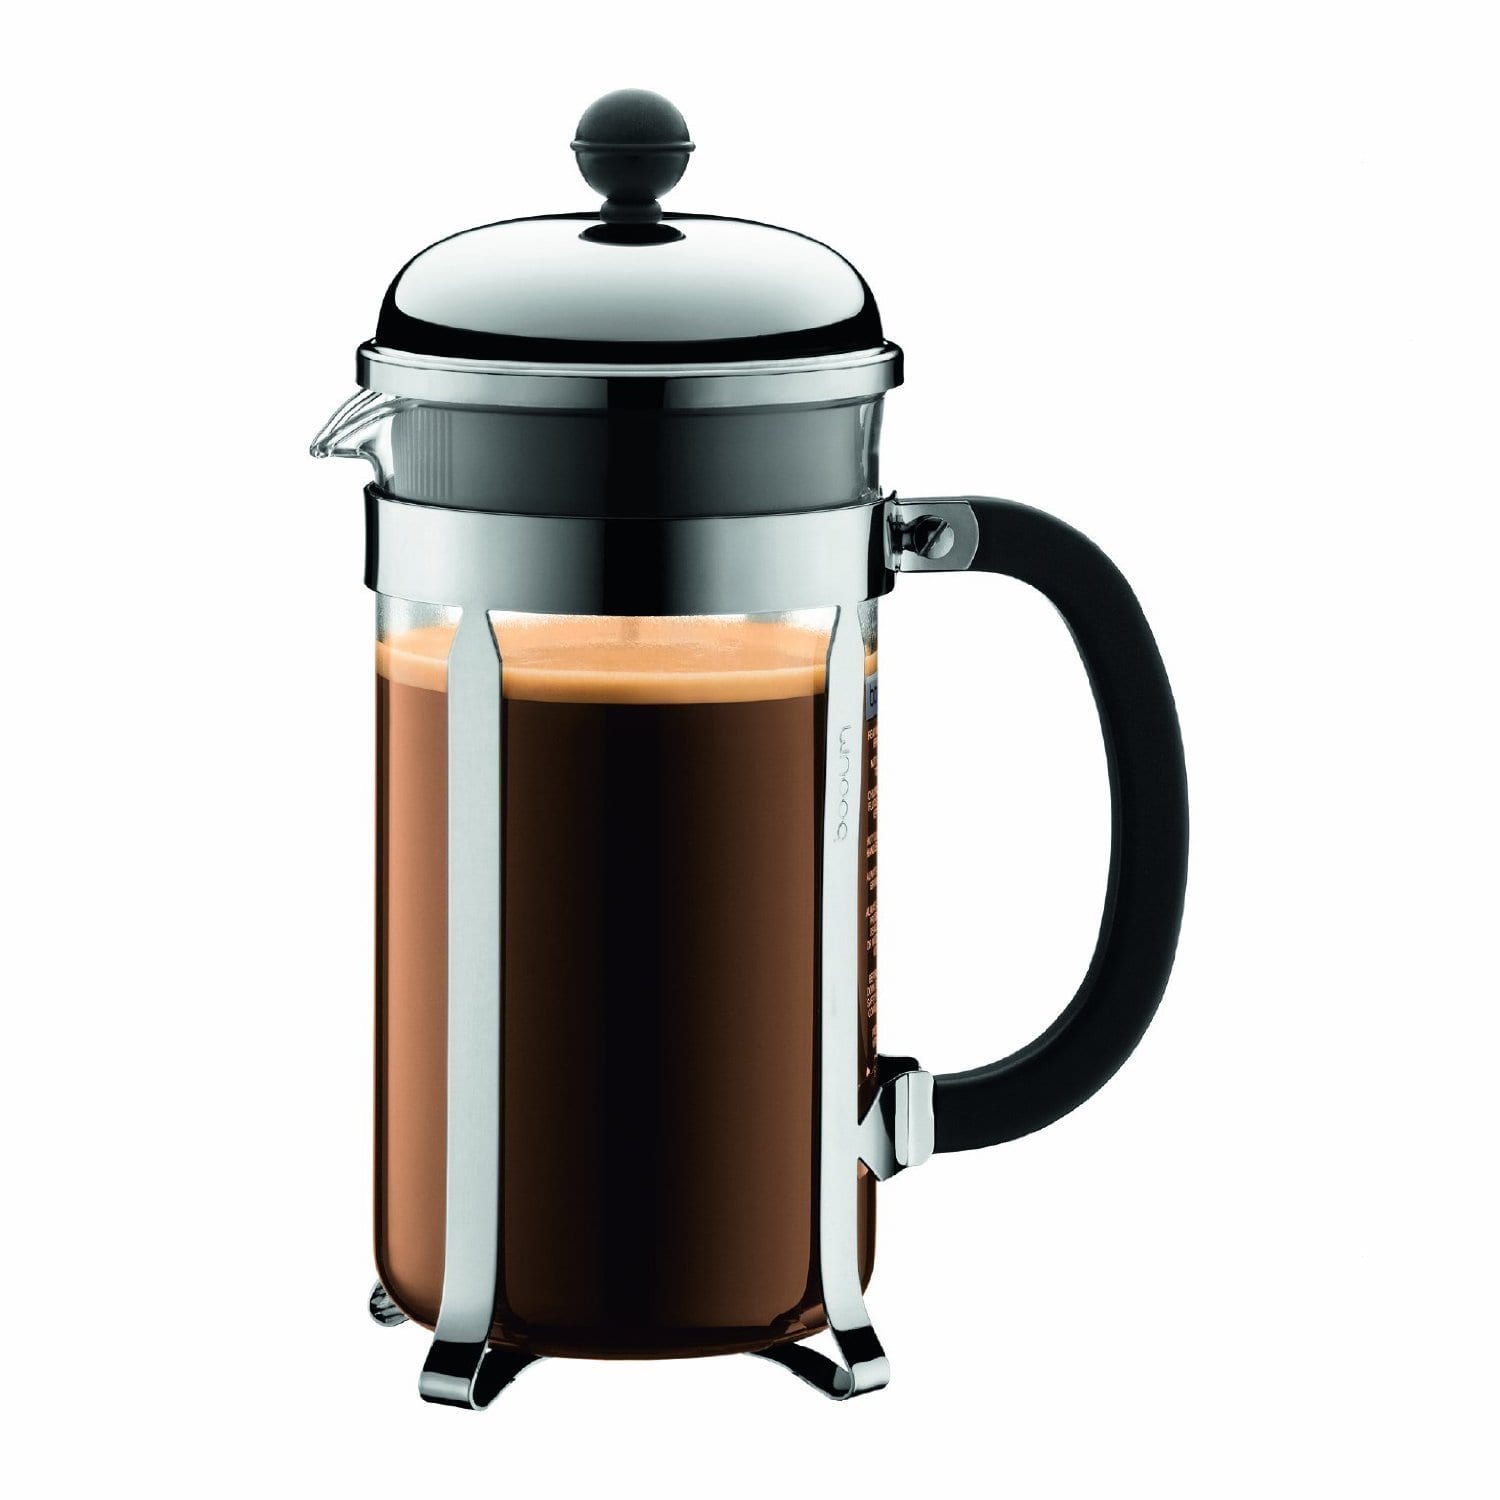 BODUM Chambord French Press Coffee Maker, 34 Ounce, Stainless Steel - image 1 of 12